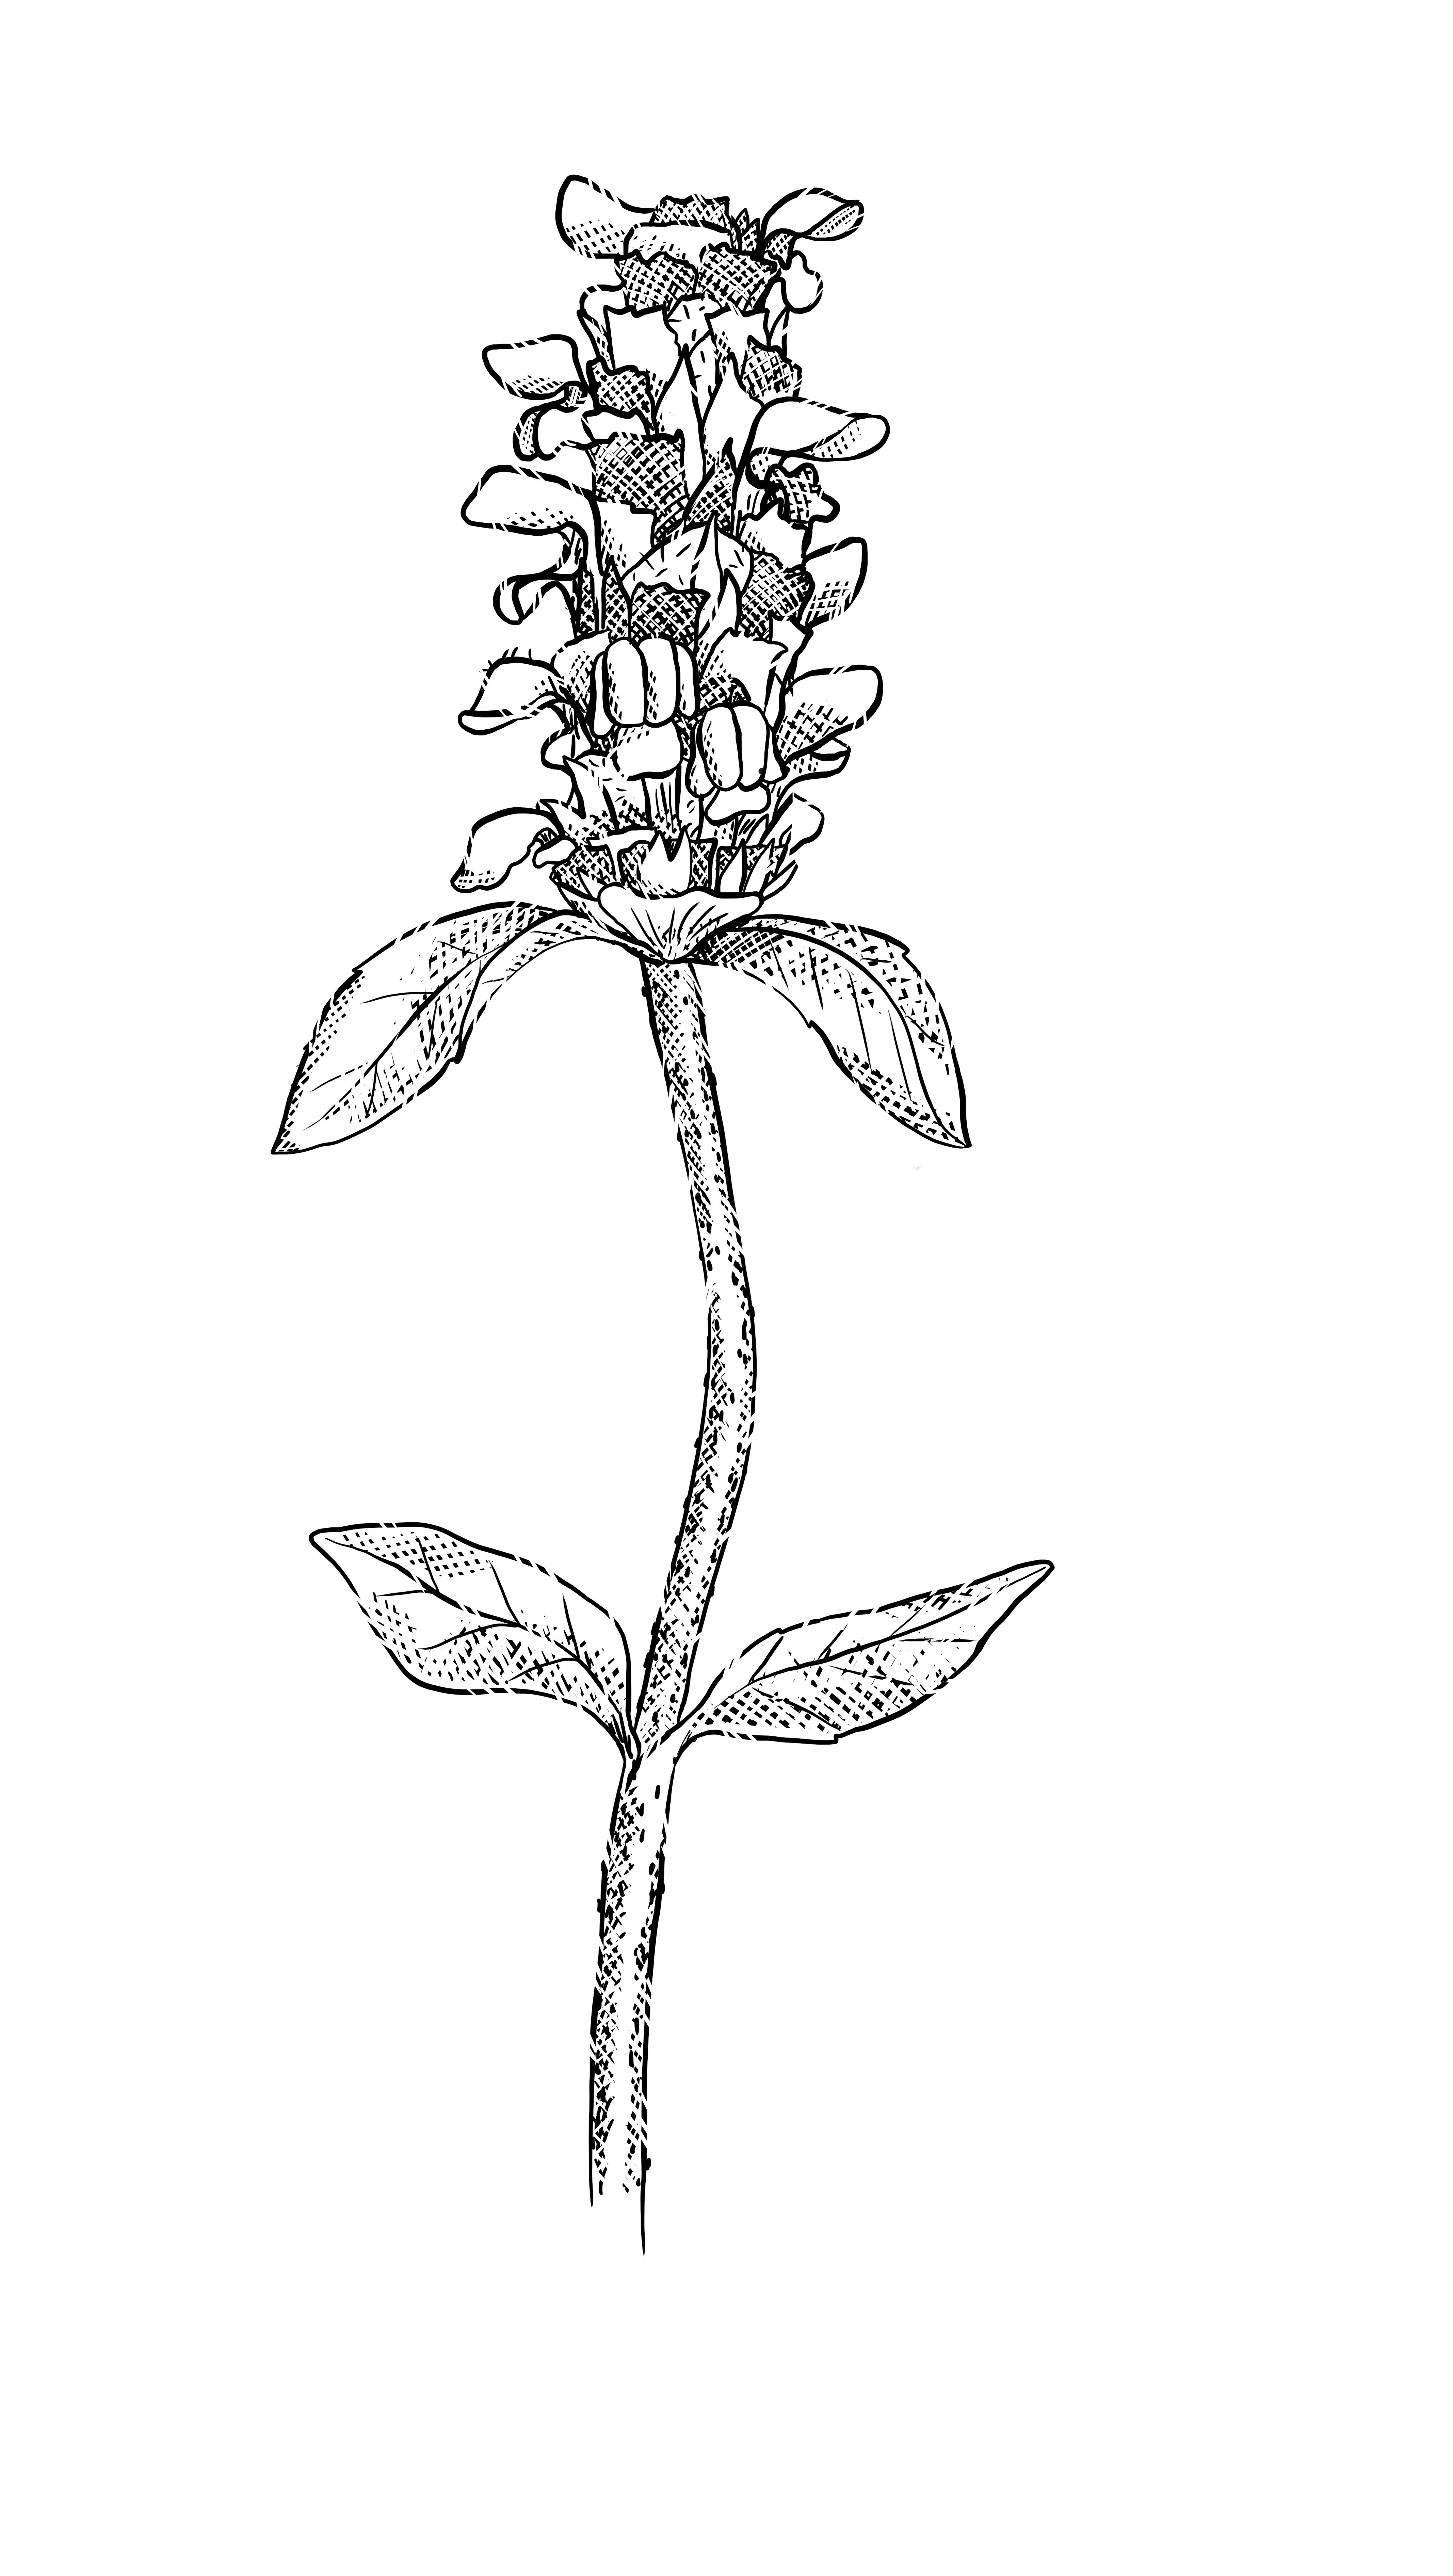 Prunizen, an extract of Prunella vulgaris, based on the edible and traditional medicinal herb cult...